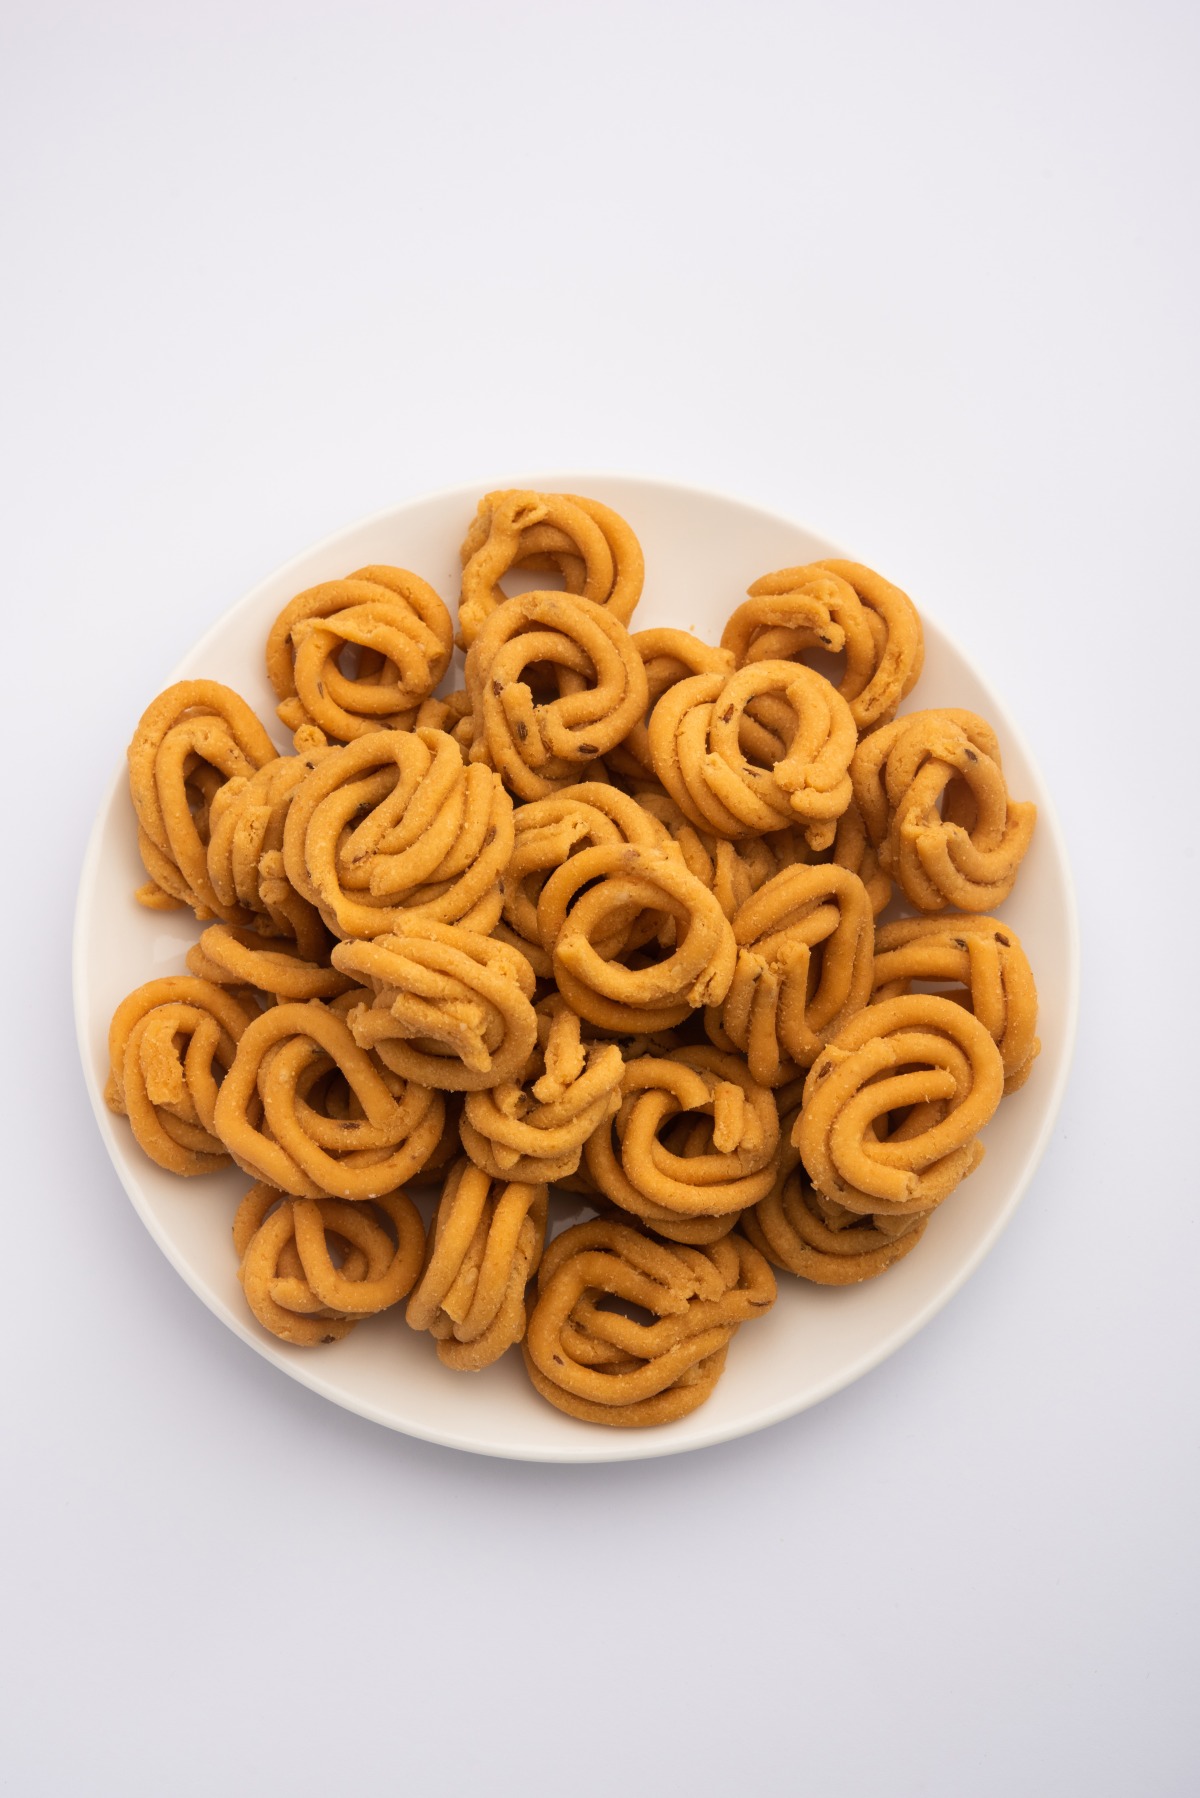 murukku-also-known-as-chakli-south-indian-traditional-vegetarian-snack